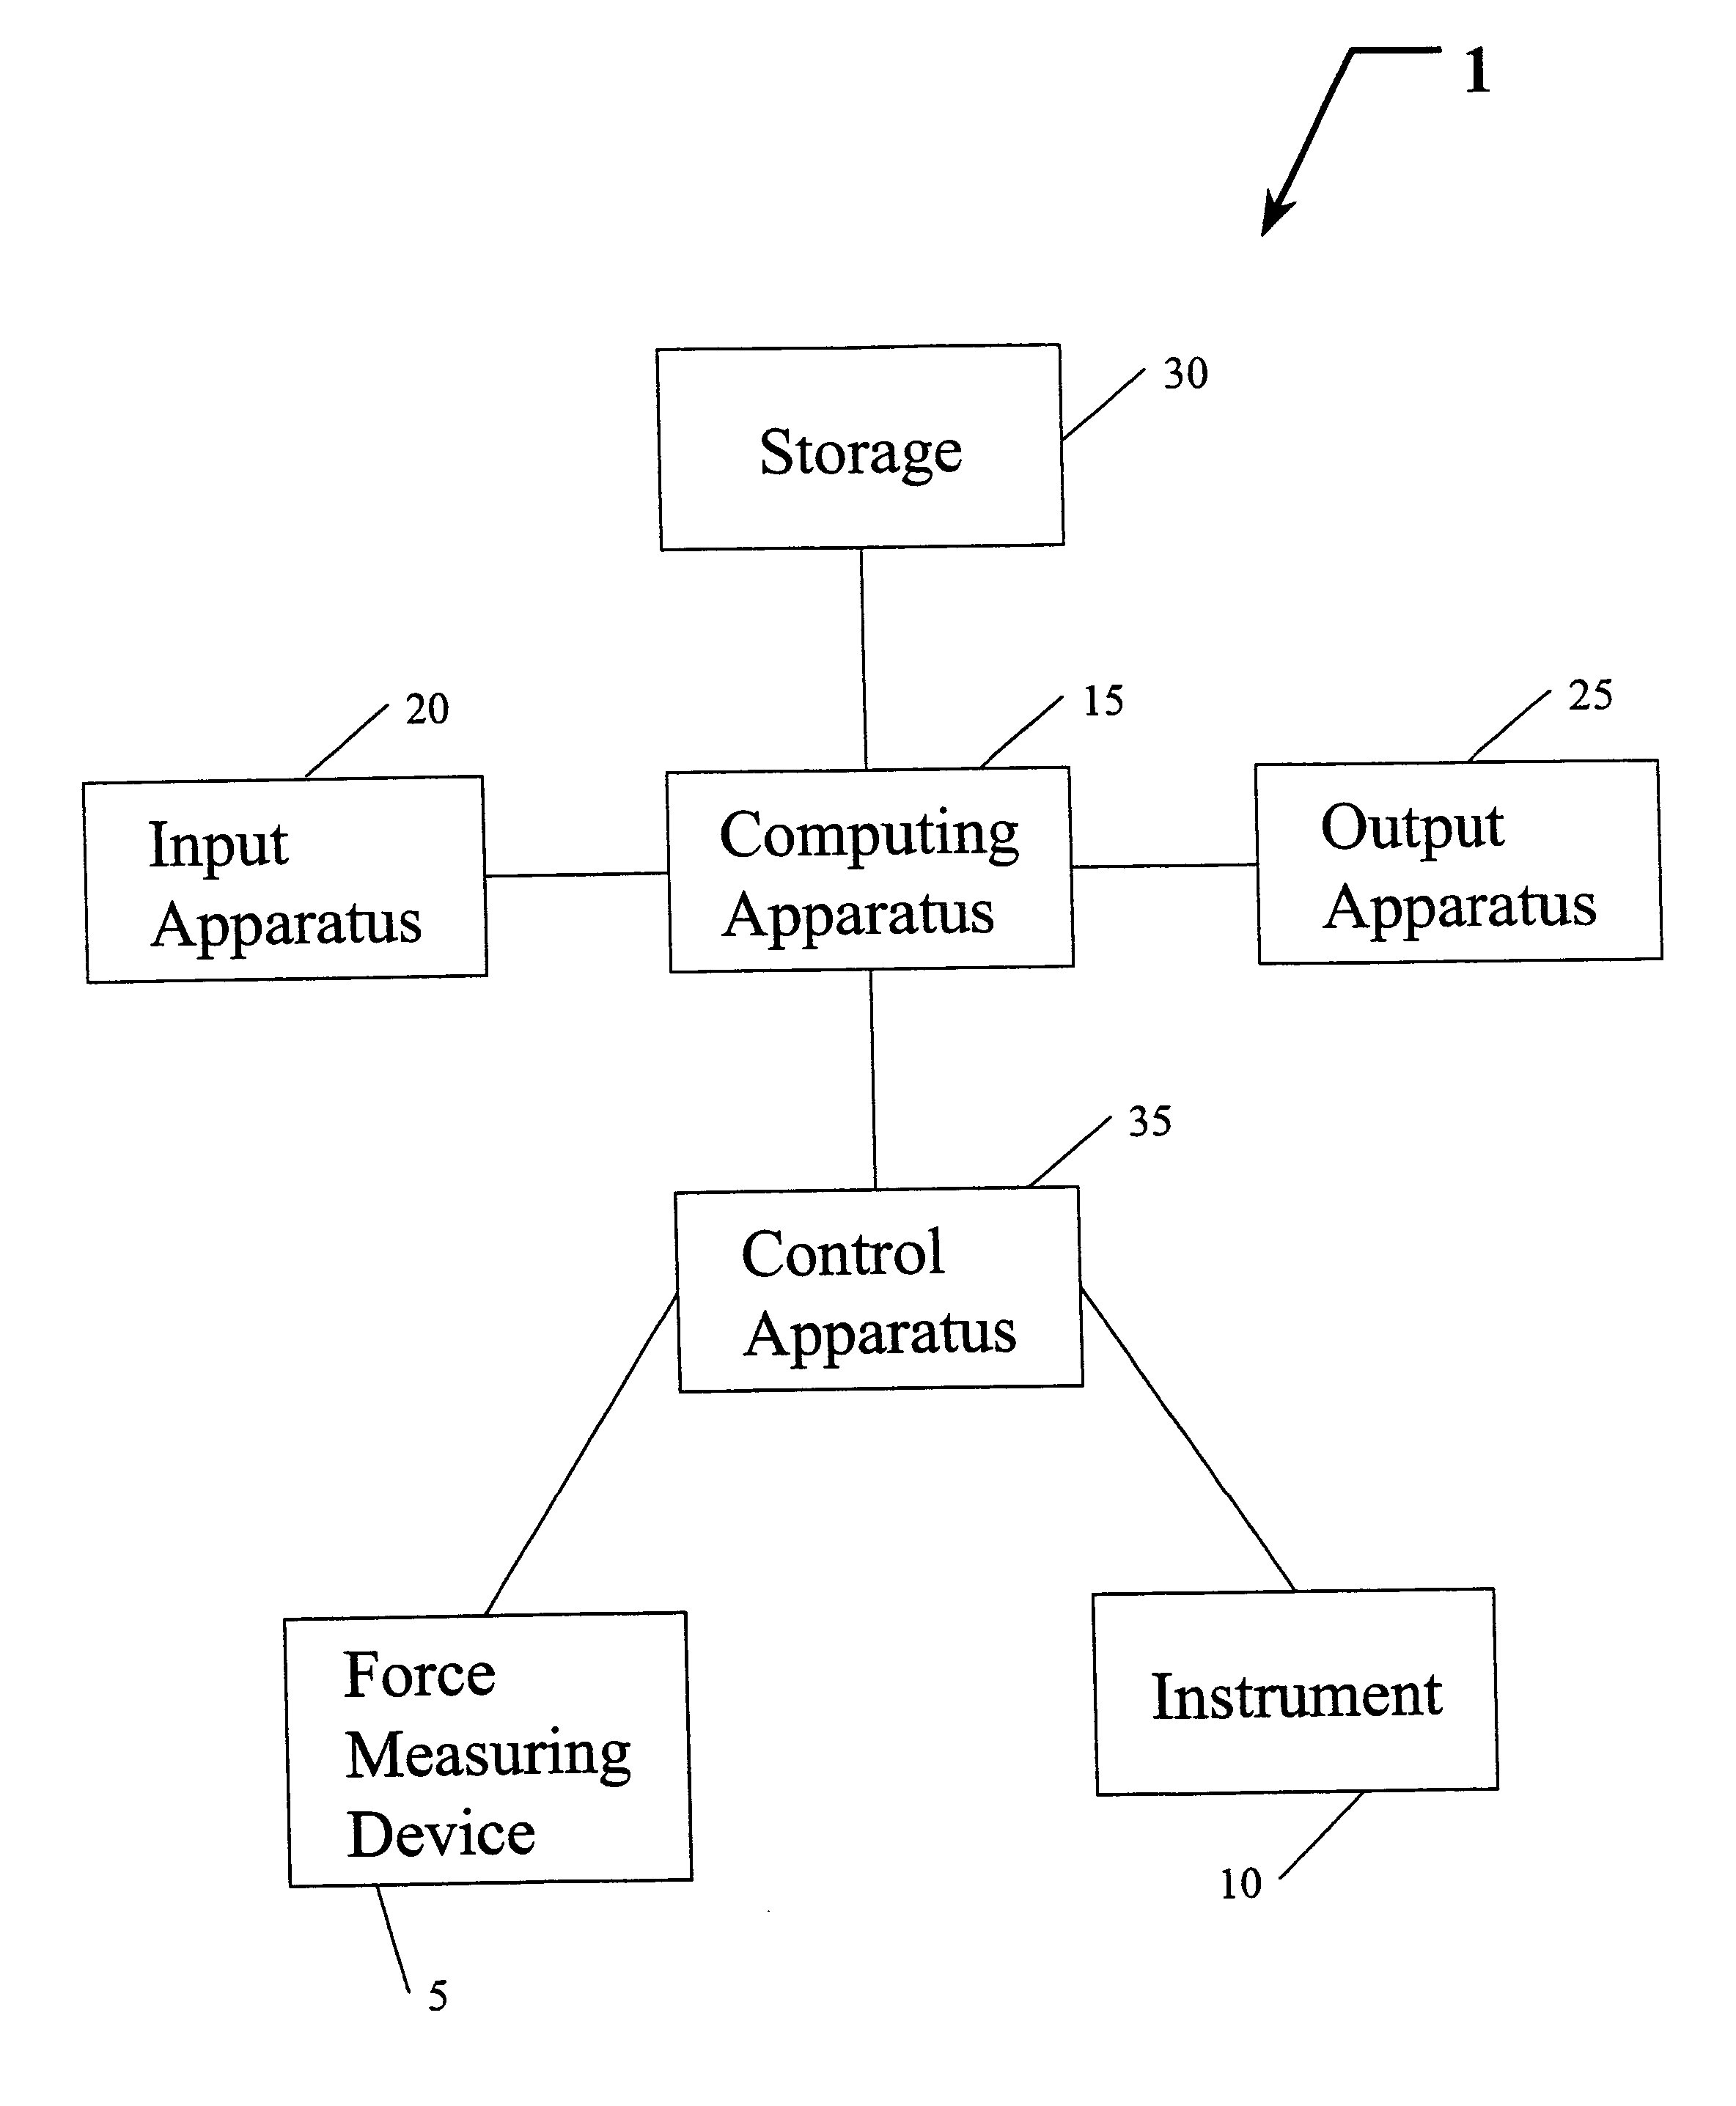 Apparatus and methods for assessing human physical performance